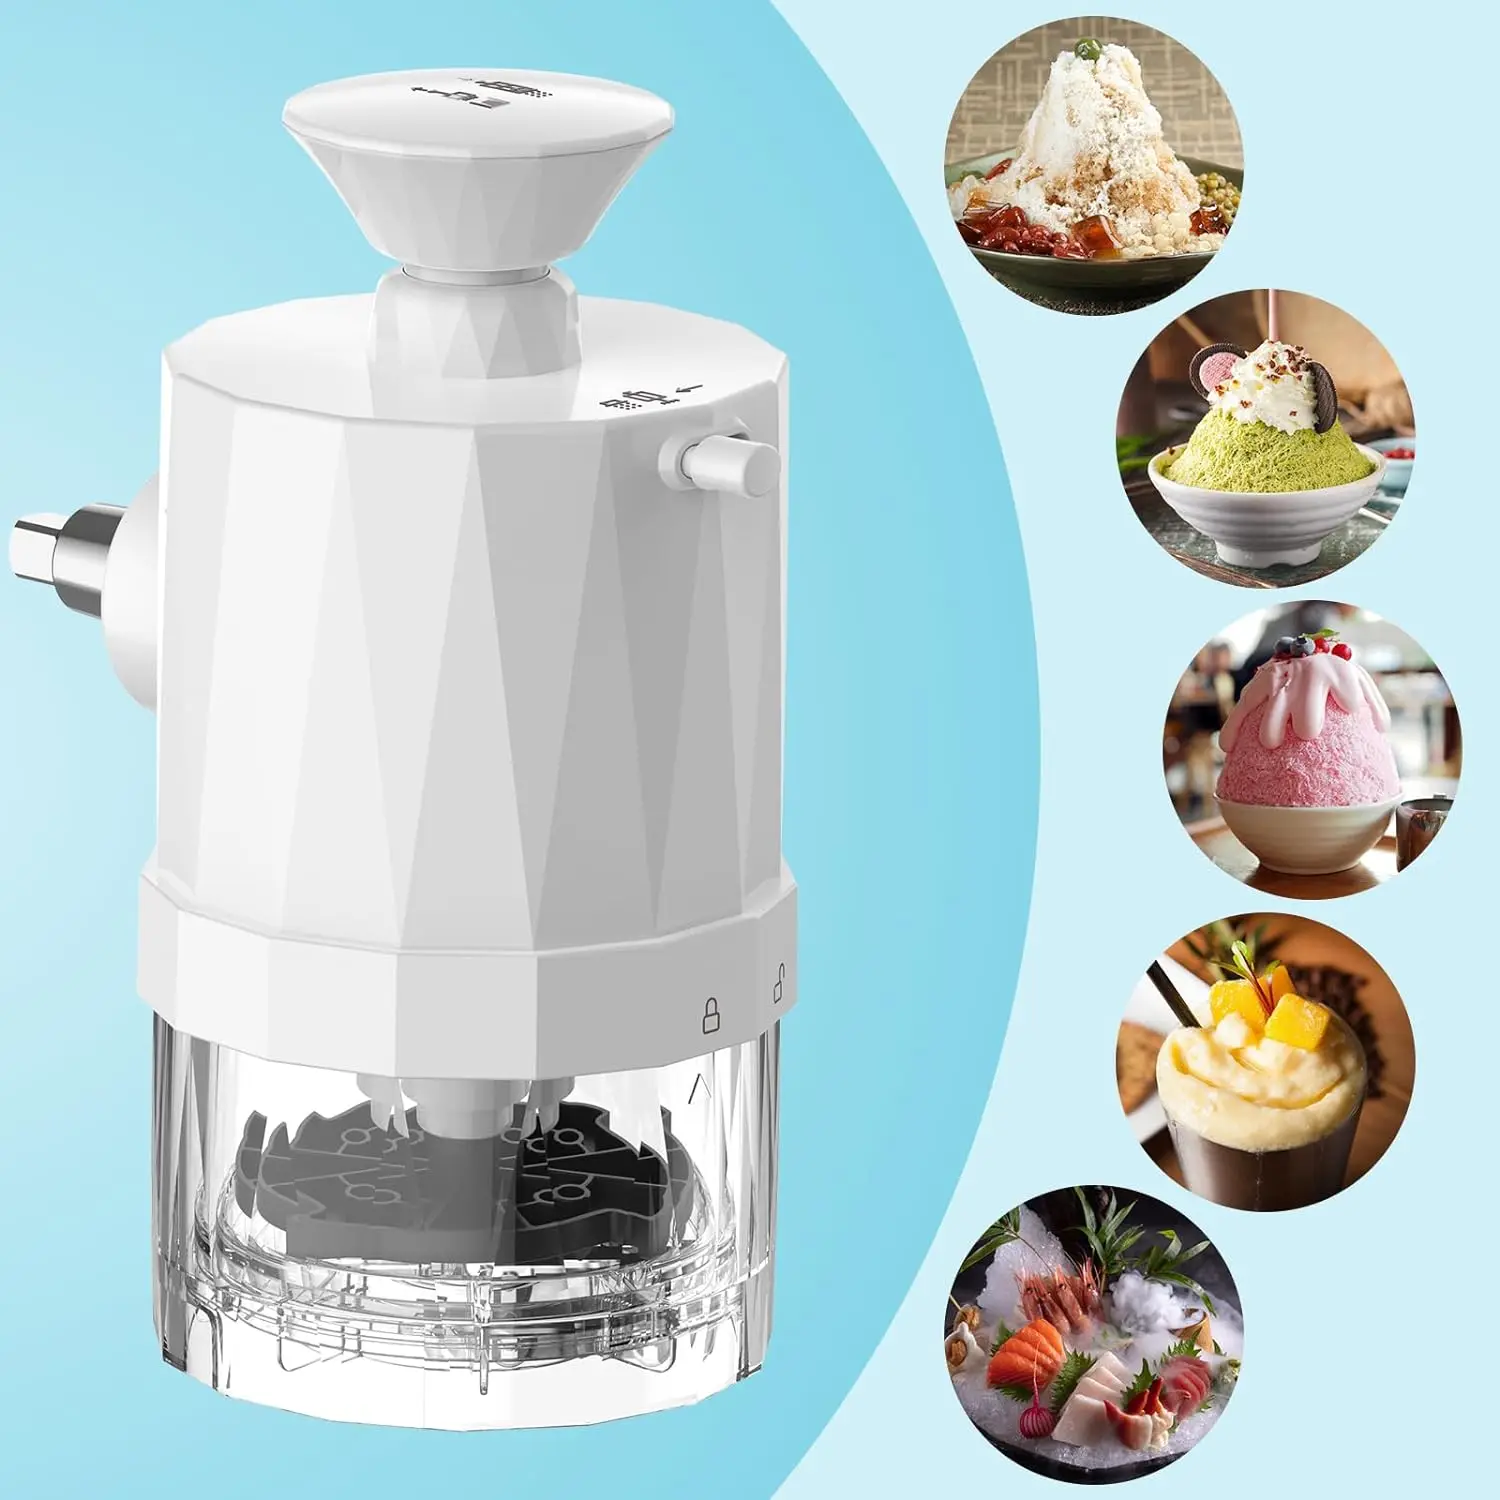 https://ae01.alicdn.com/kf/S71b11c10e2914604a2d9b4ebf8ff7b73j/Shaved-Ice-Attachment-for-KitchenAid-Stand-Mixer-As-Kitchen-Aid-Attachment-for-Stand-Mixer-Snow-Cone.jpg